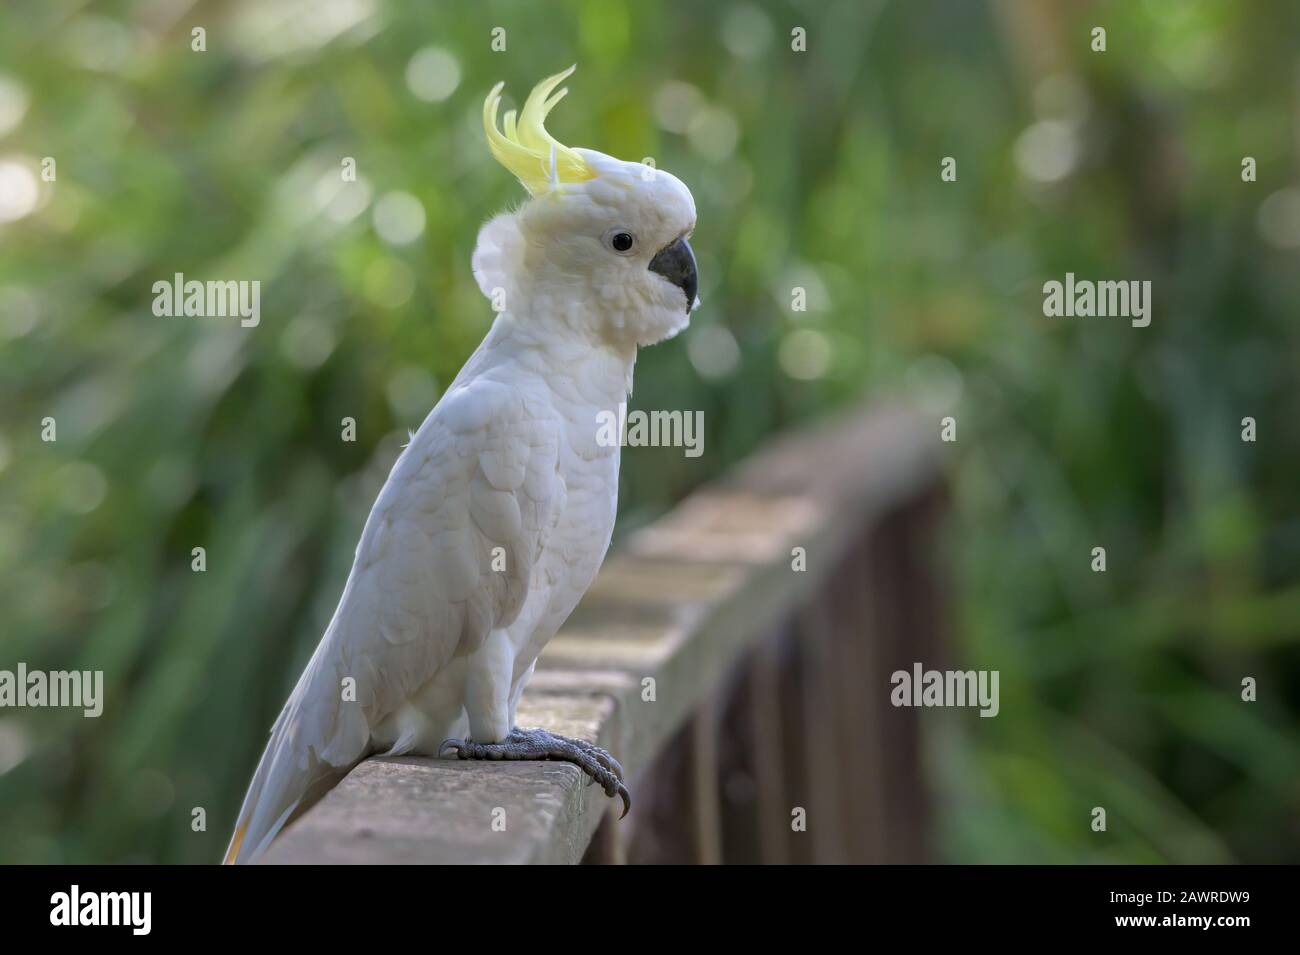 Cockatoo Sitting On A Wooden Deck Fence Stock Photo